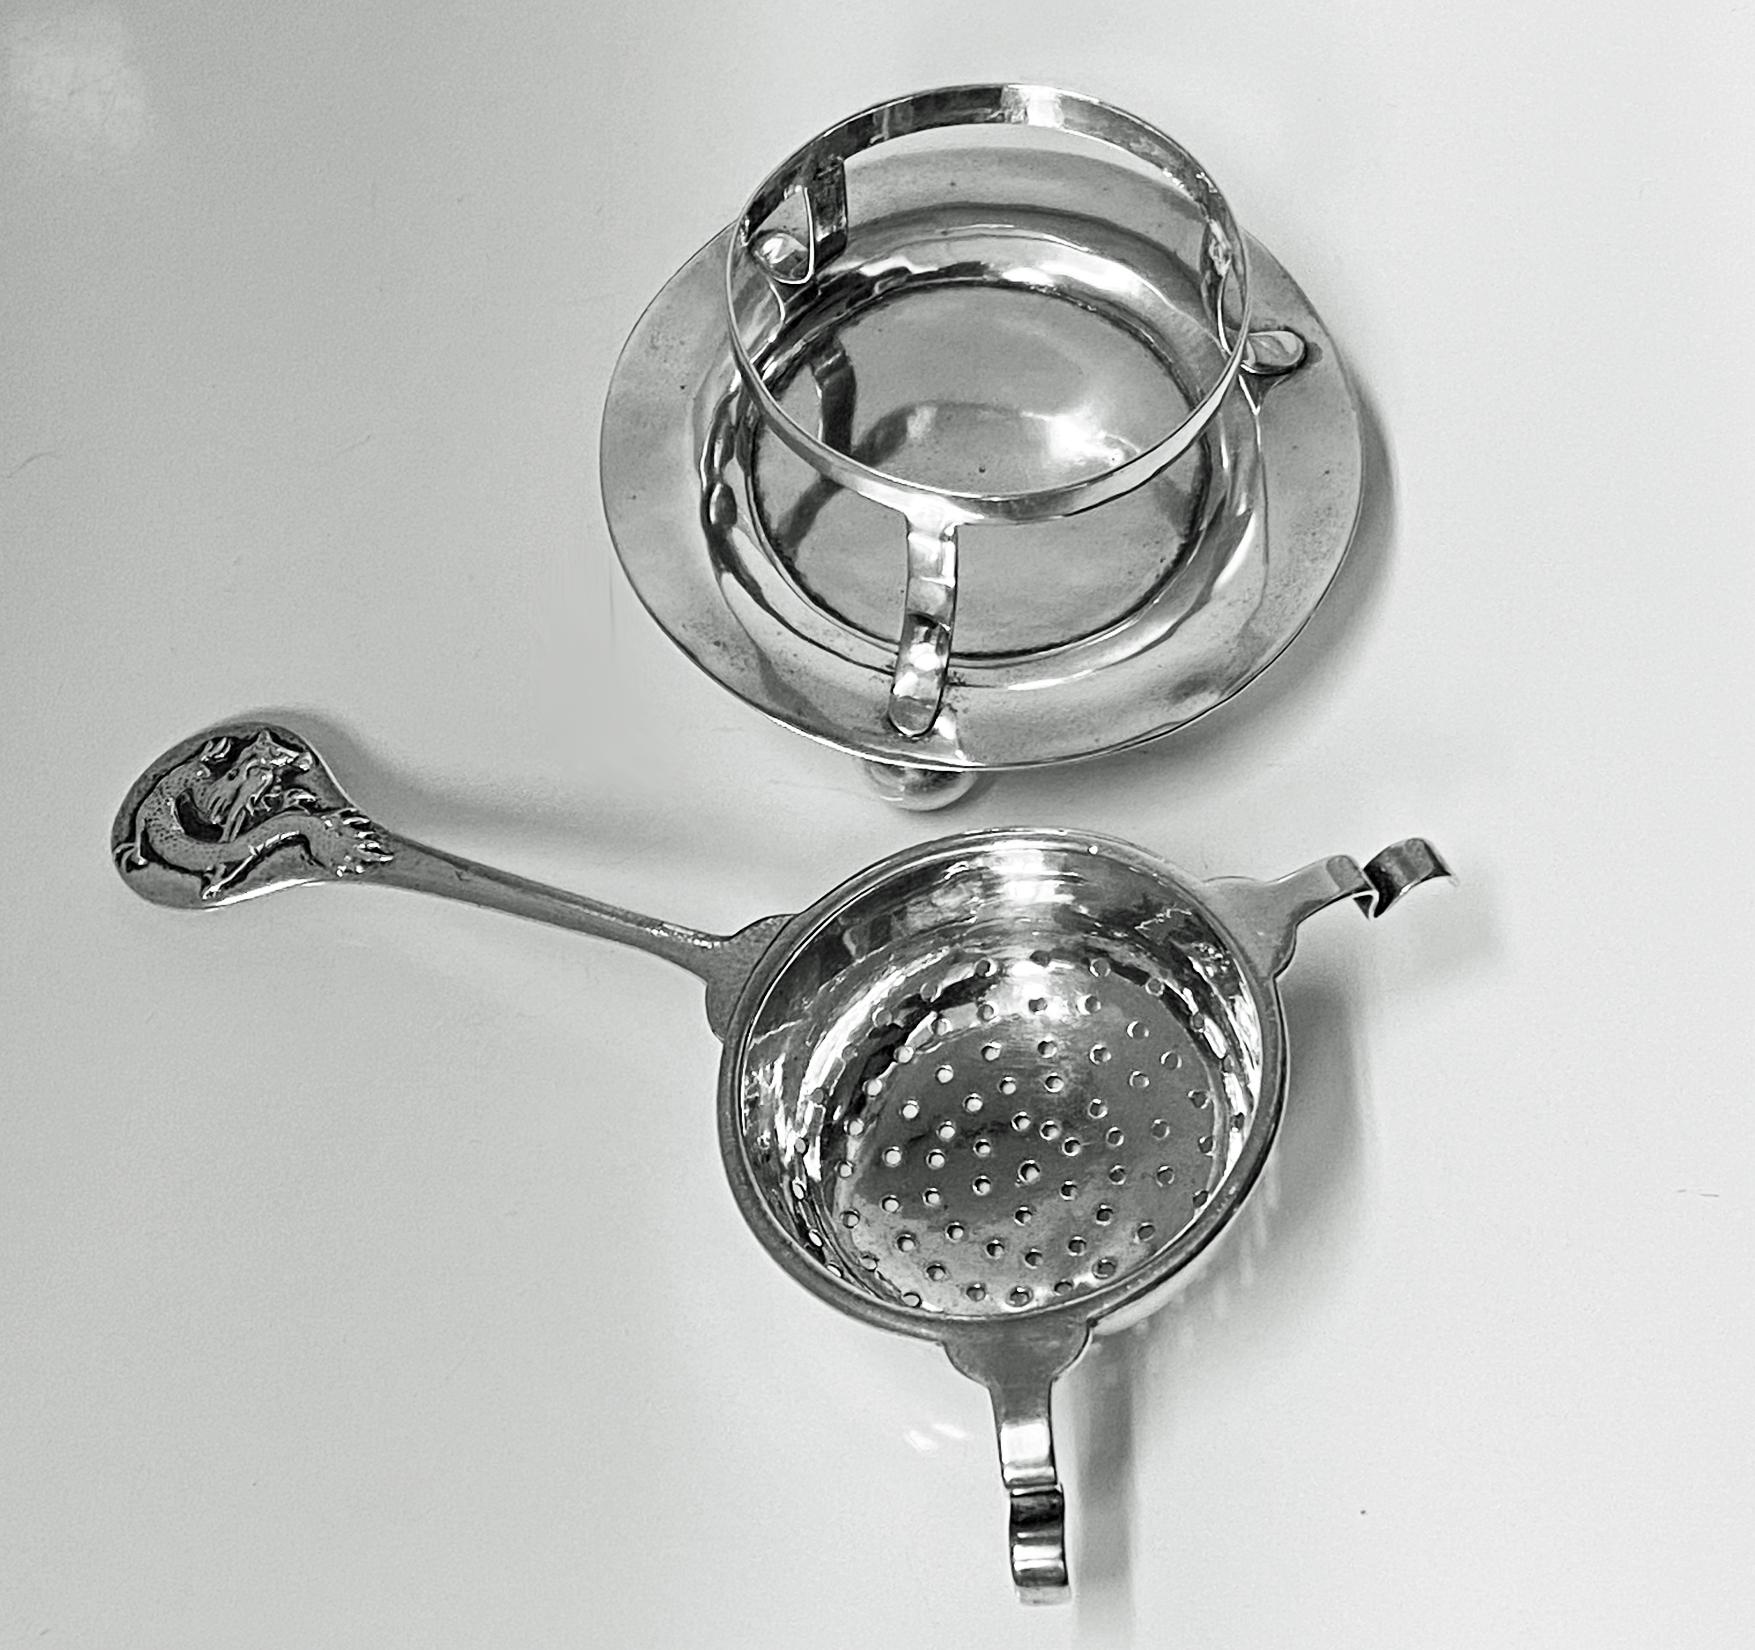 Chinese Export Silver Tea Strainer on Stand, Tuck Chang, Shanghai, C.1900 2